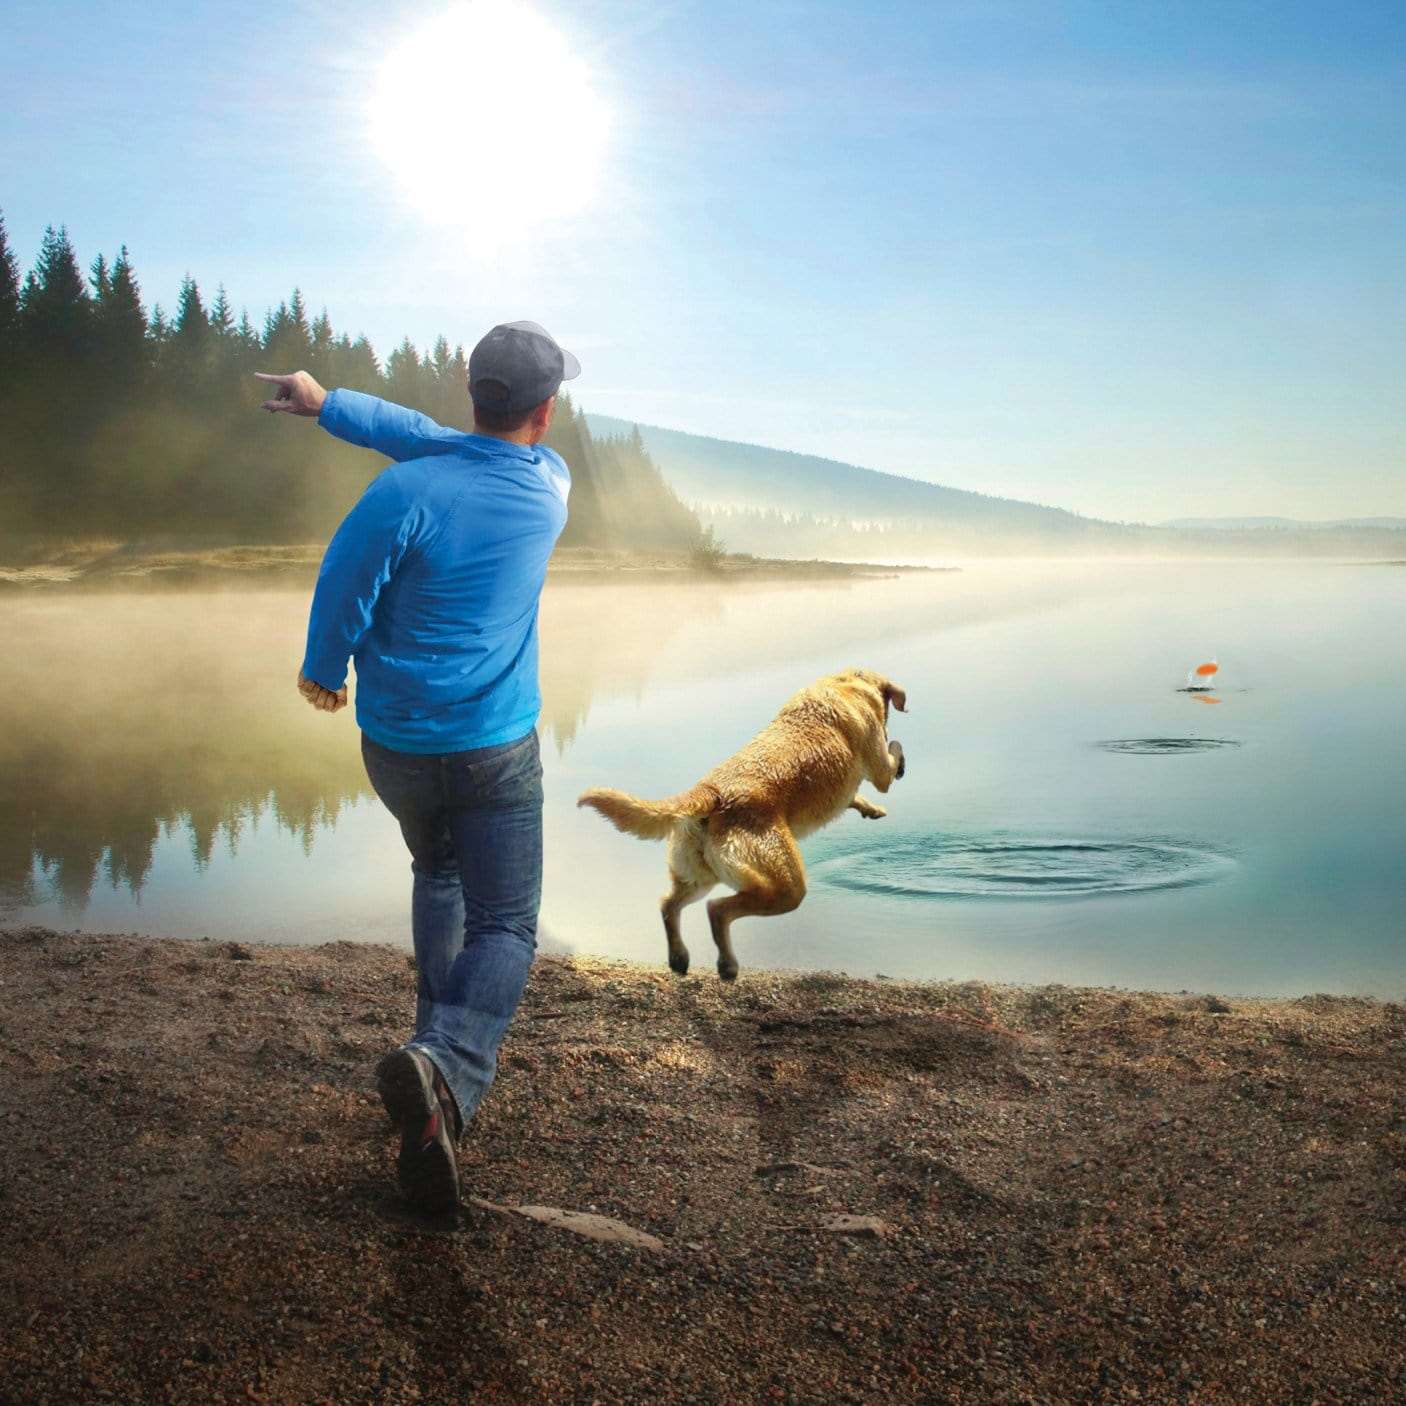 Man throwing a skipping stone into a clam lake for his dog to fetch.